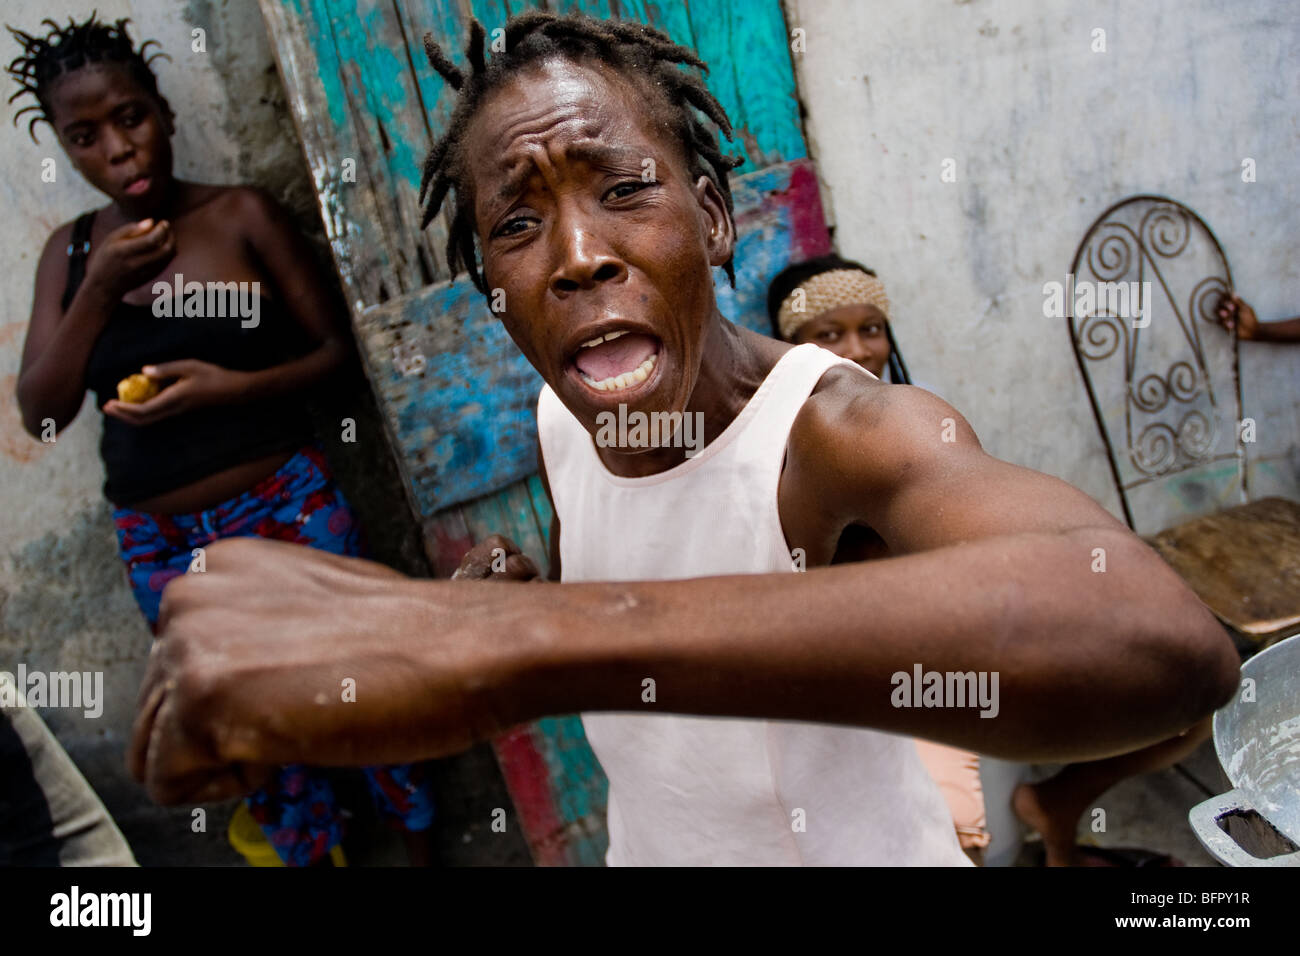 An angry woman shouting in the slum of Cite Soleil, Port-au-Prince, Haiti. Stock Photo